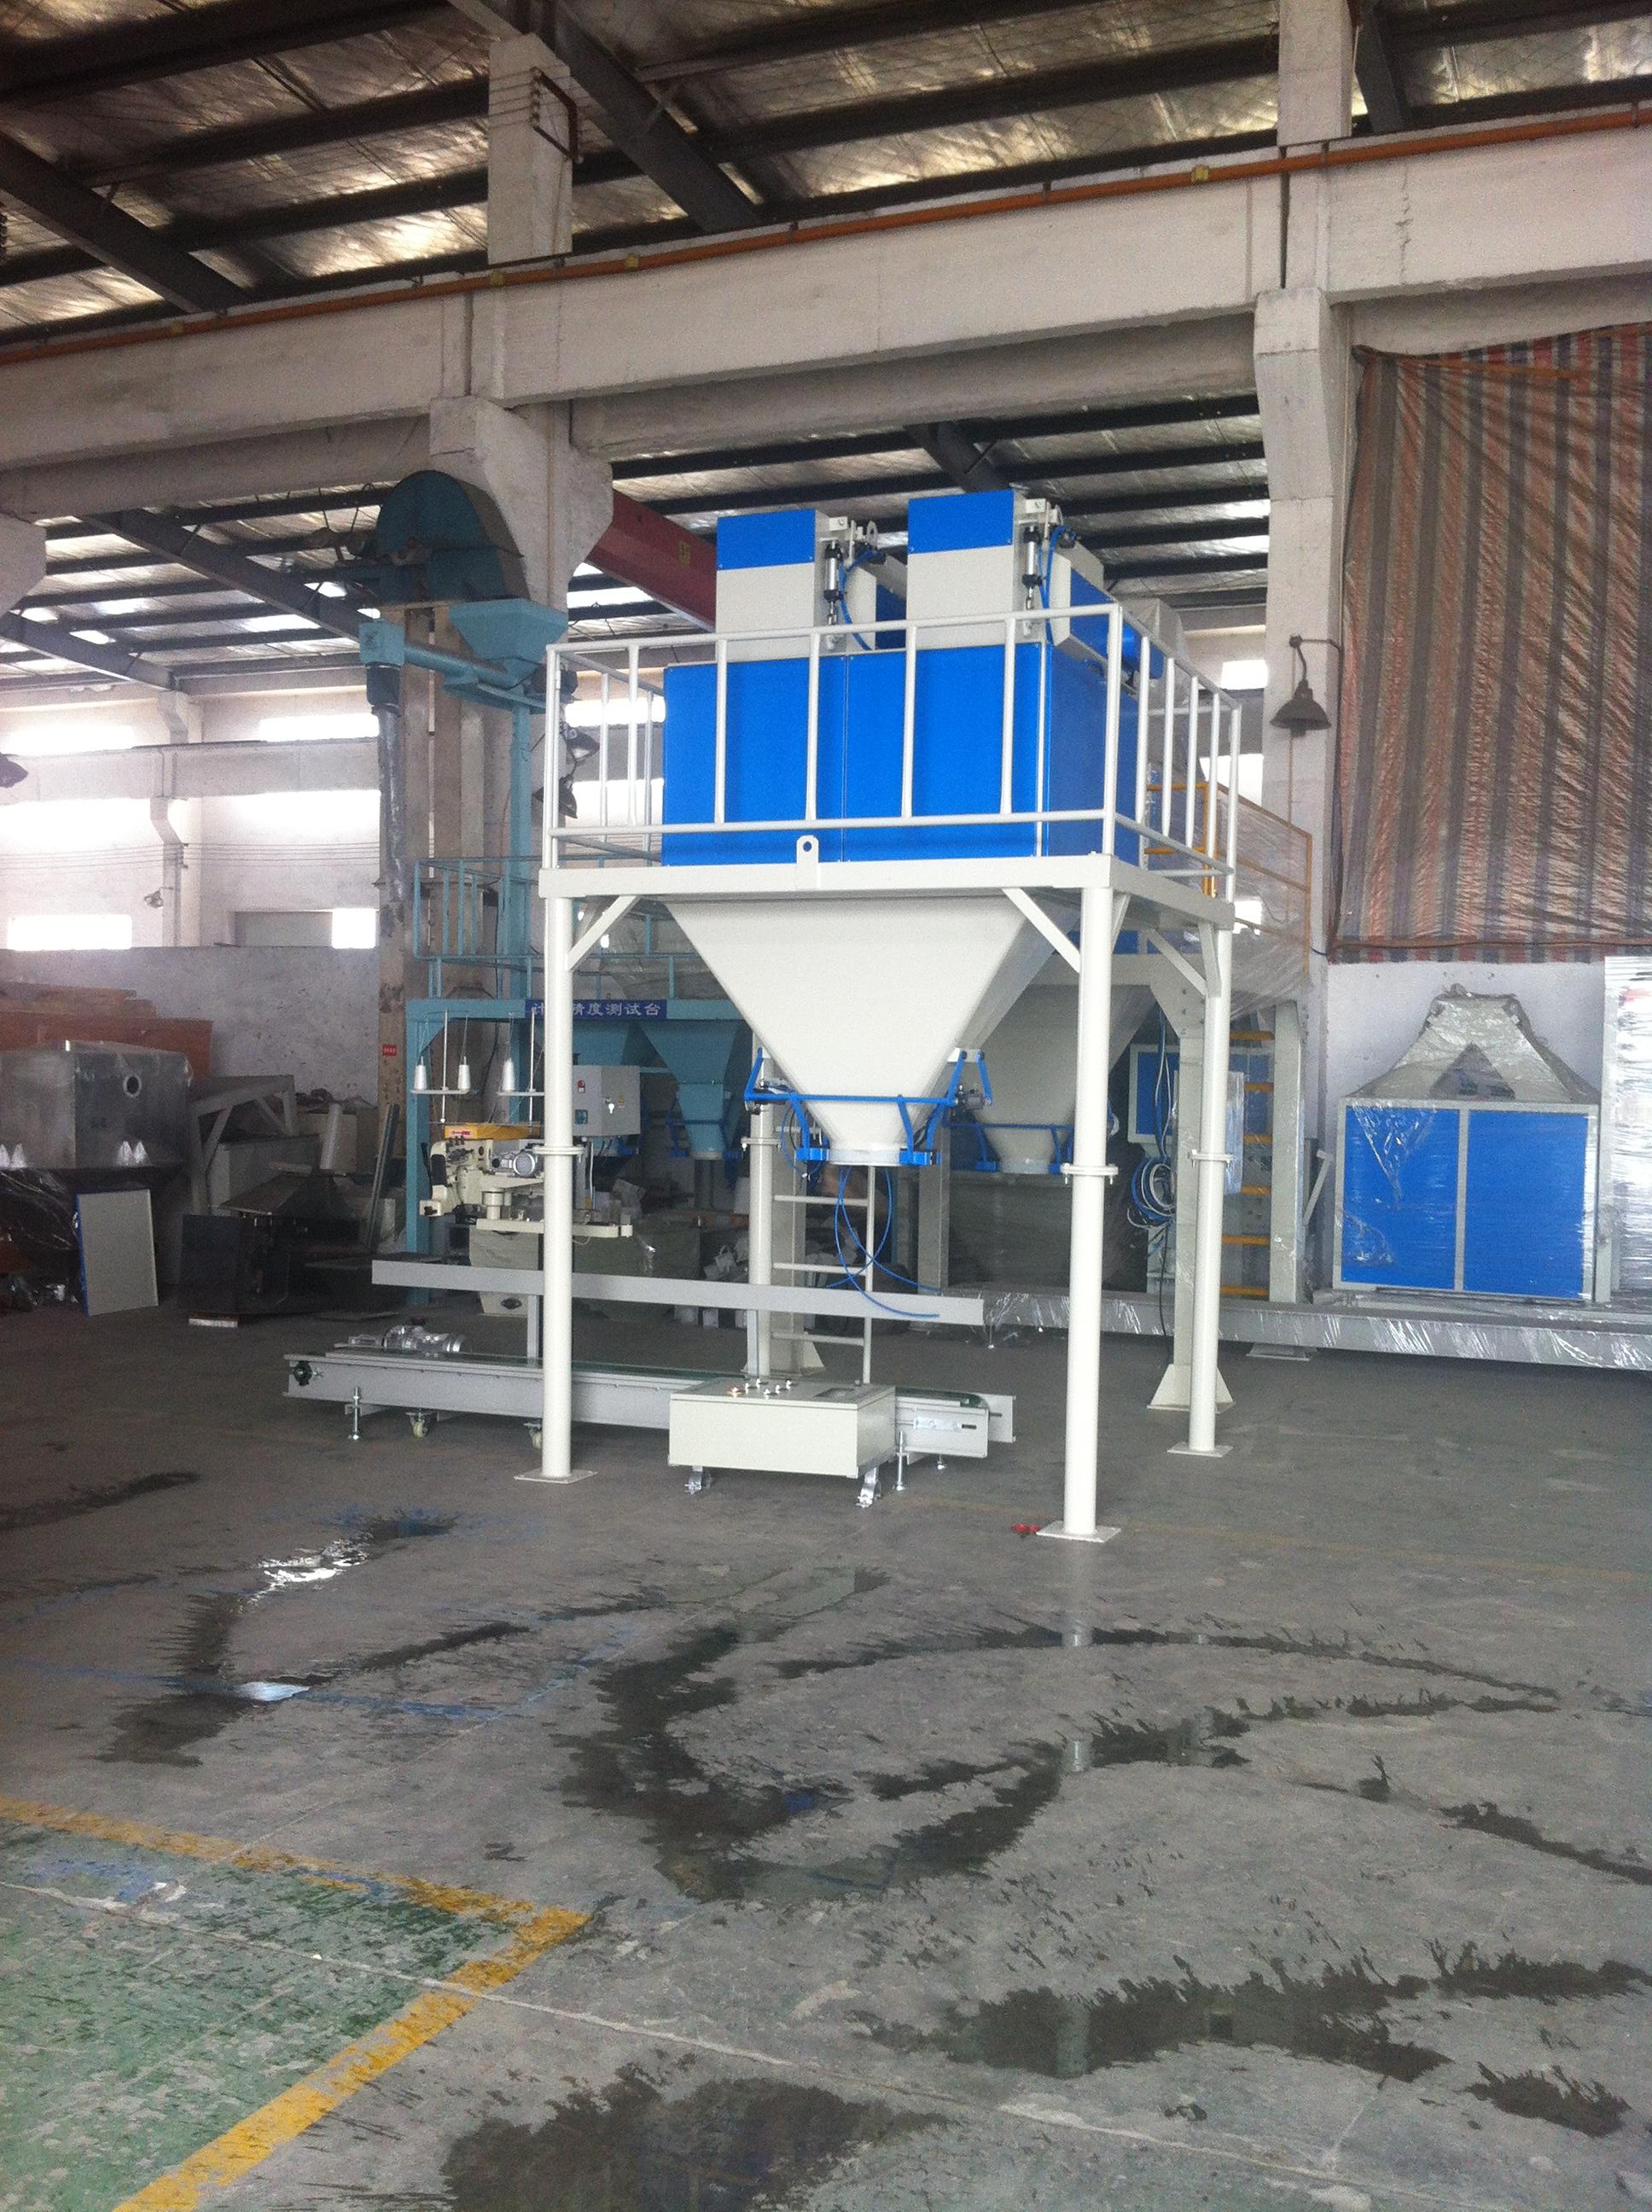 open-mouth bagging scale filling machine Wheat flour Milling equipment baking flour bagging plant Animal feeds packaging machine Milling equipment Maize Meal bagging machine PIG FINISHING MEAL packing